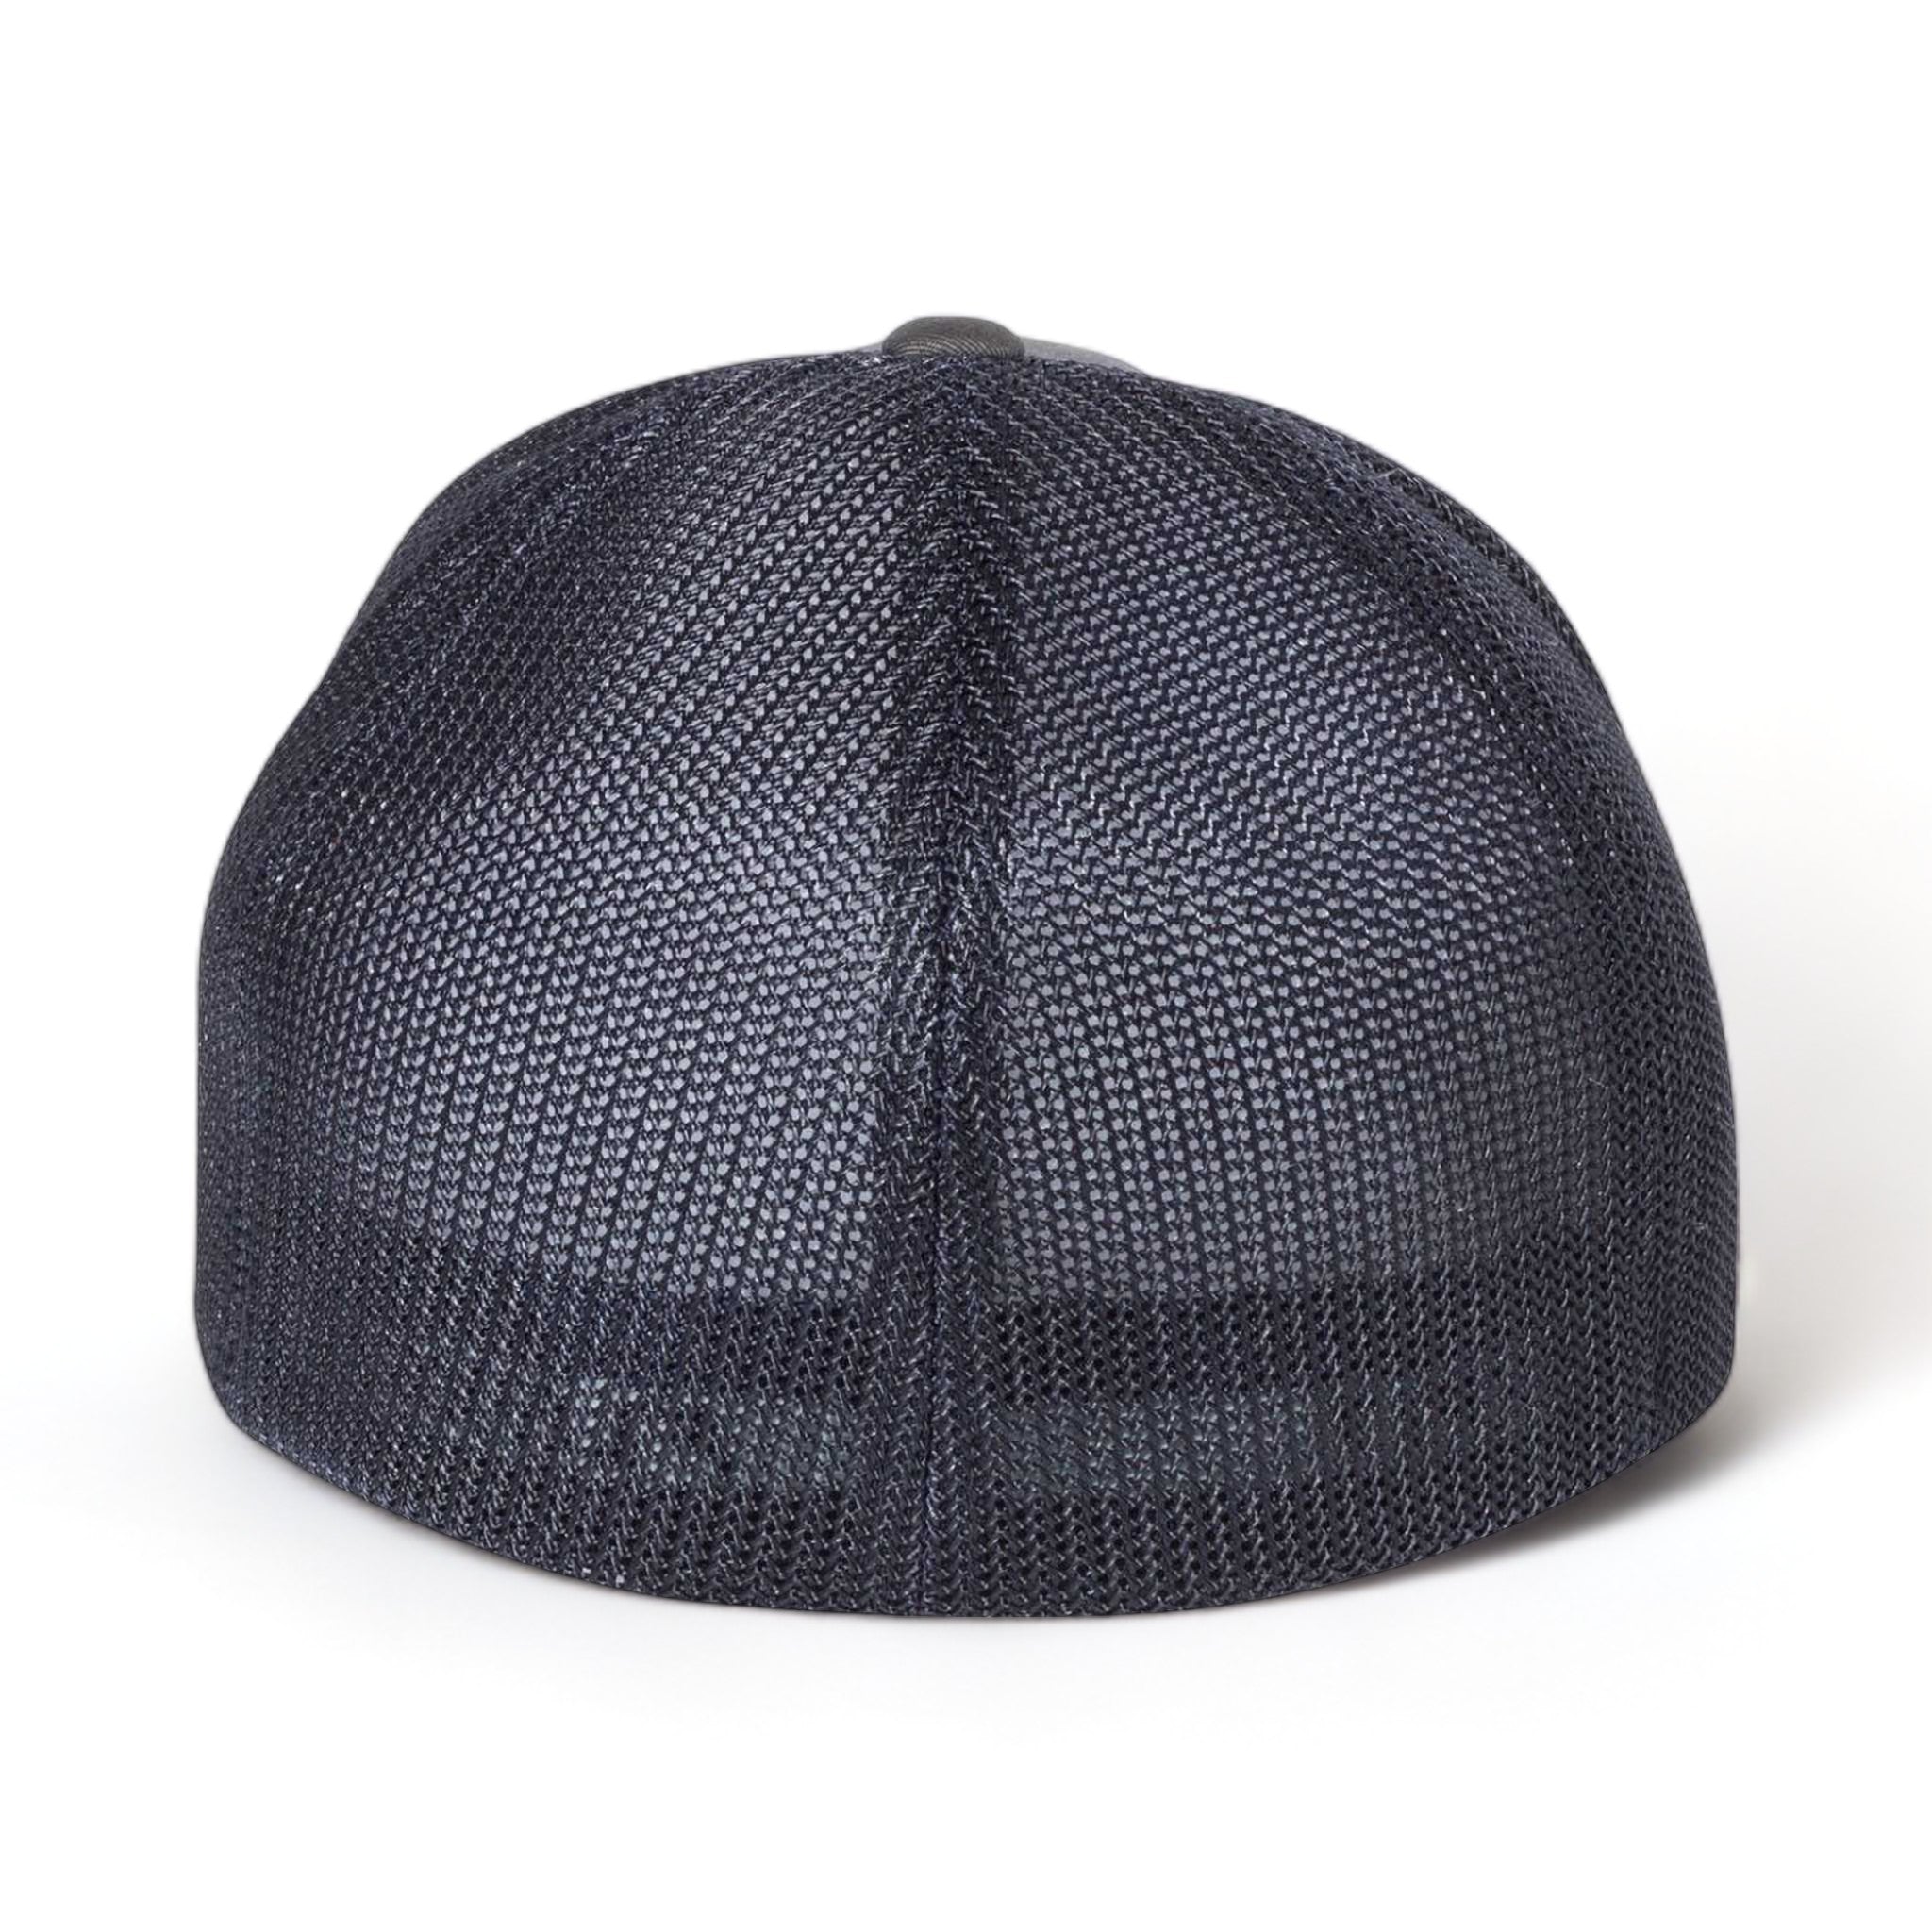 Back view of Flexfit 6511 custom hat in charcoal and navy